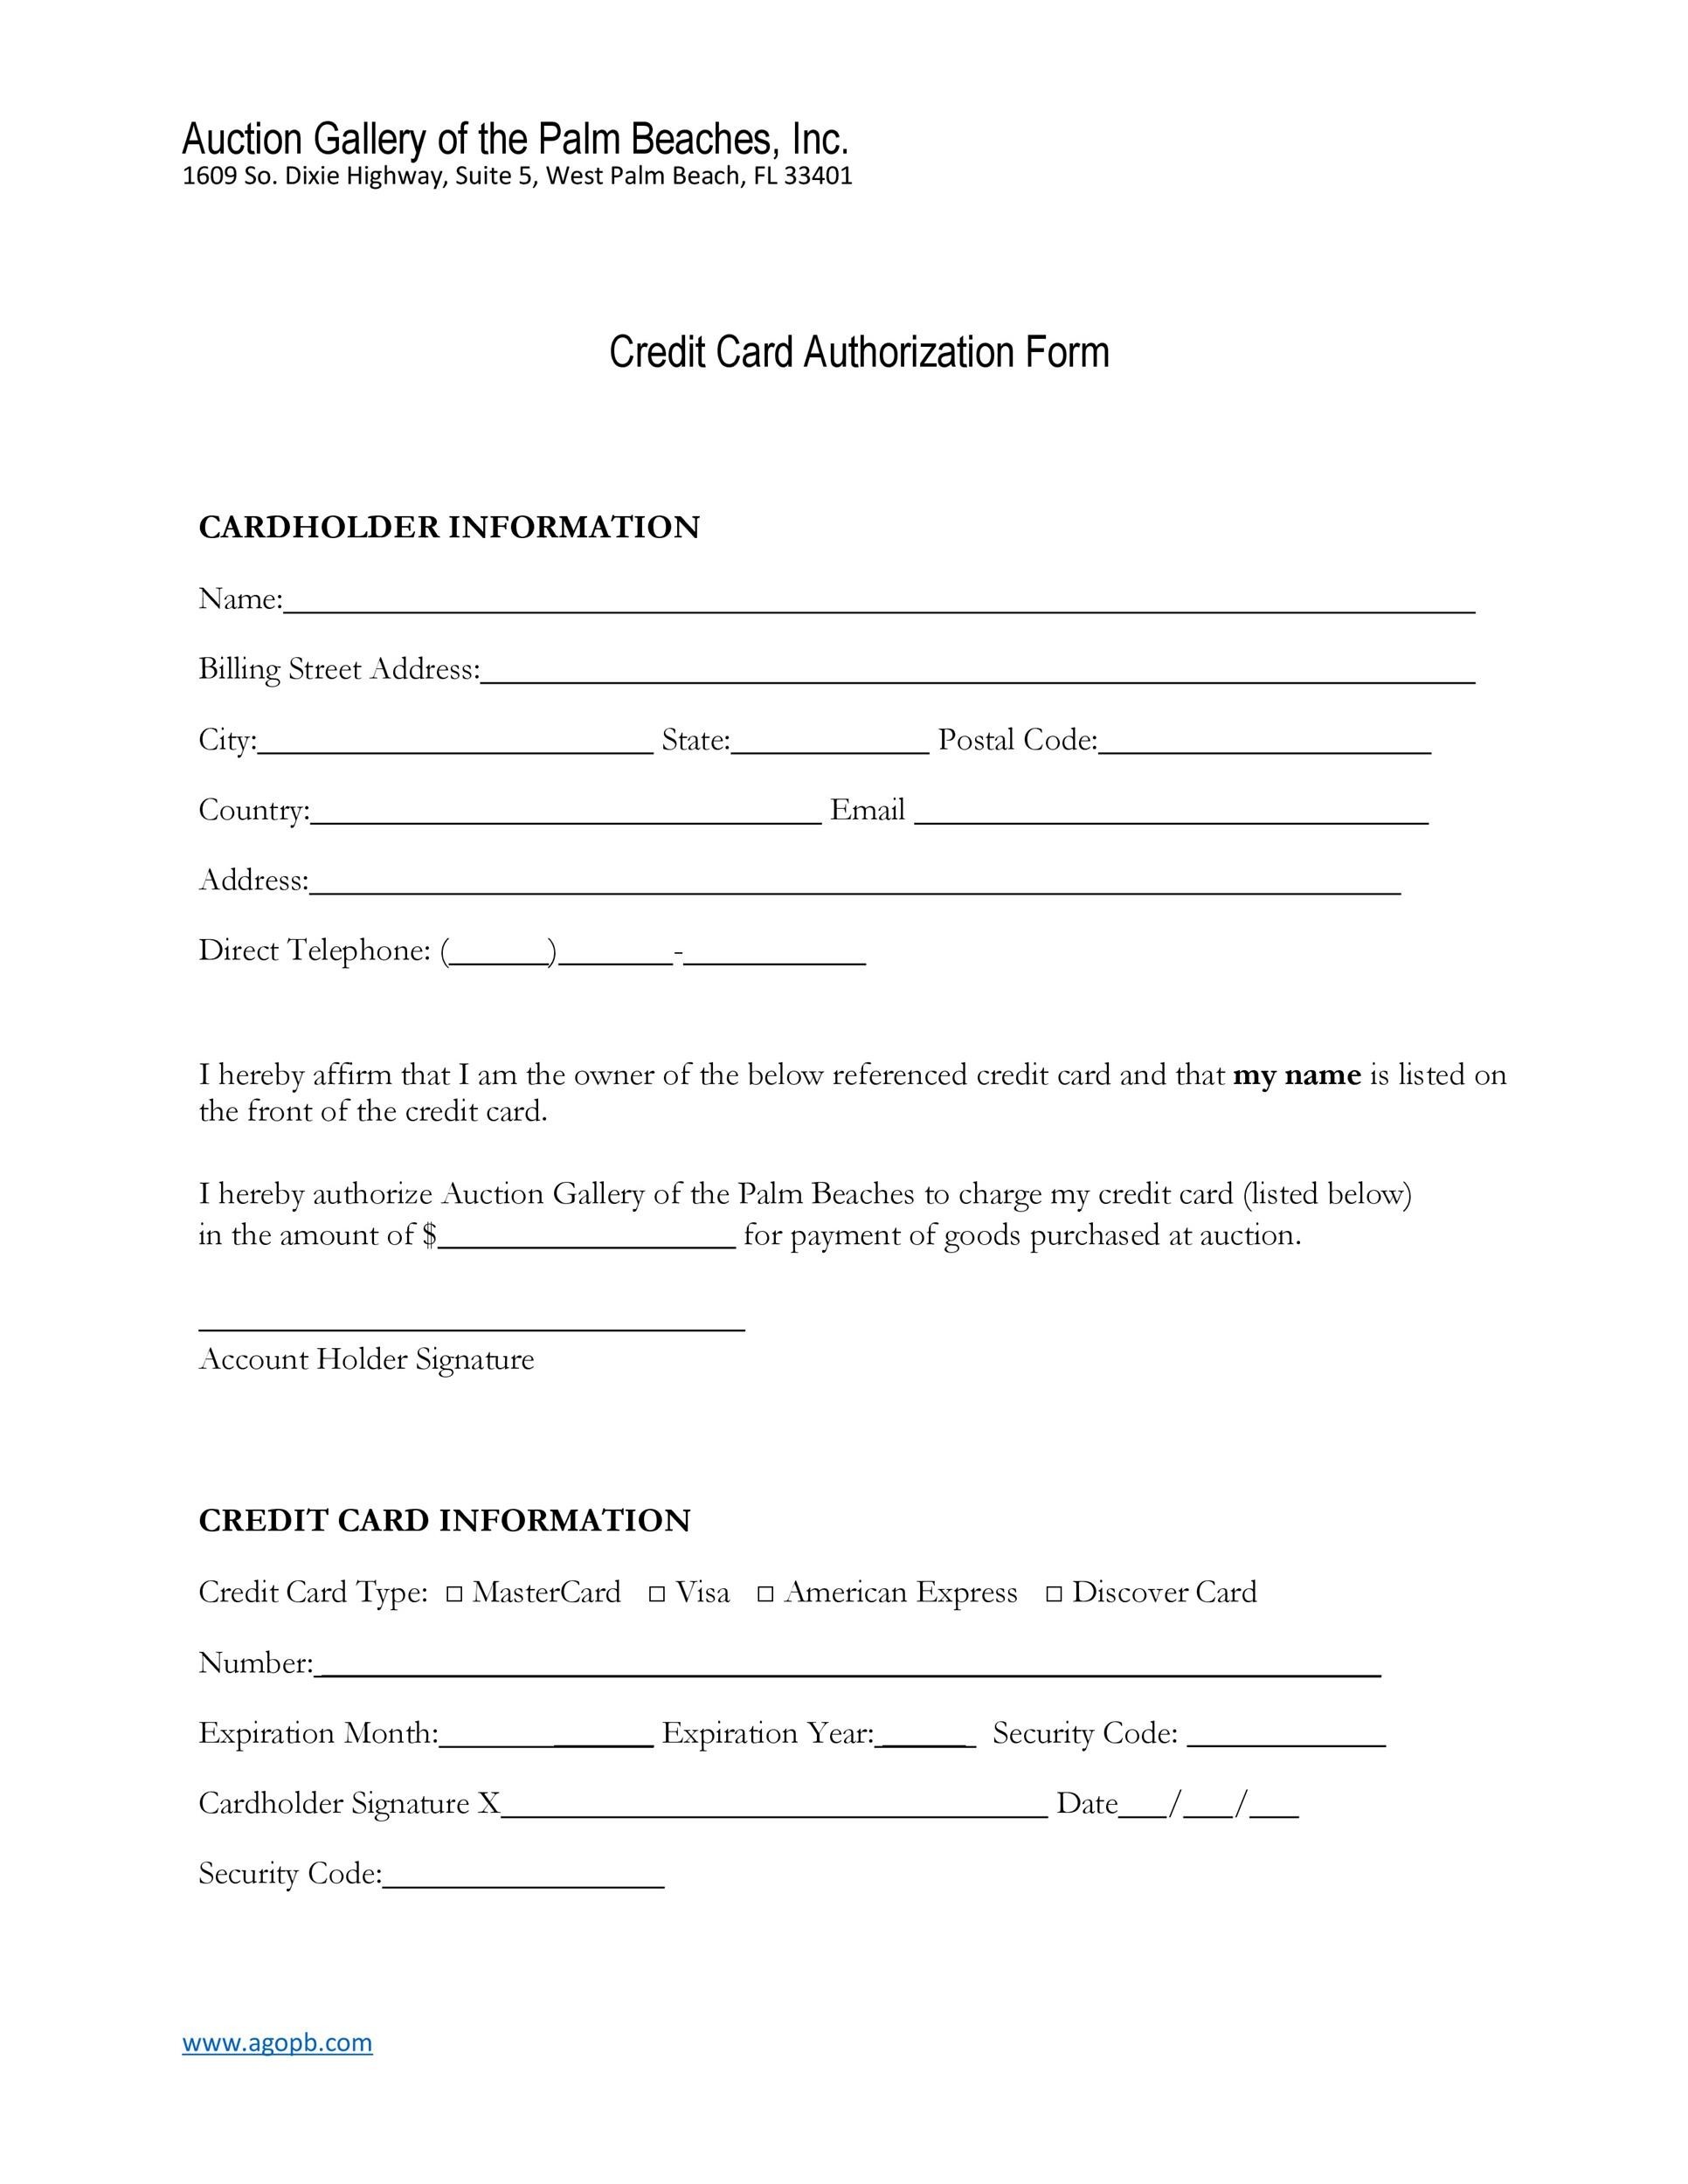 Free credit card authorization form template 09